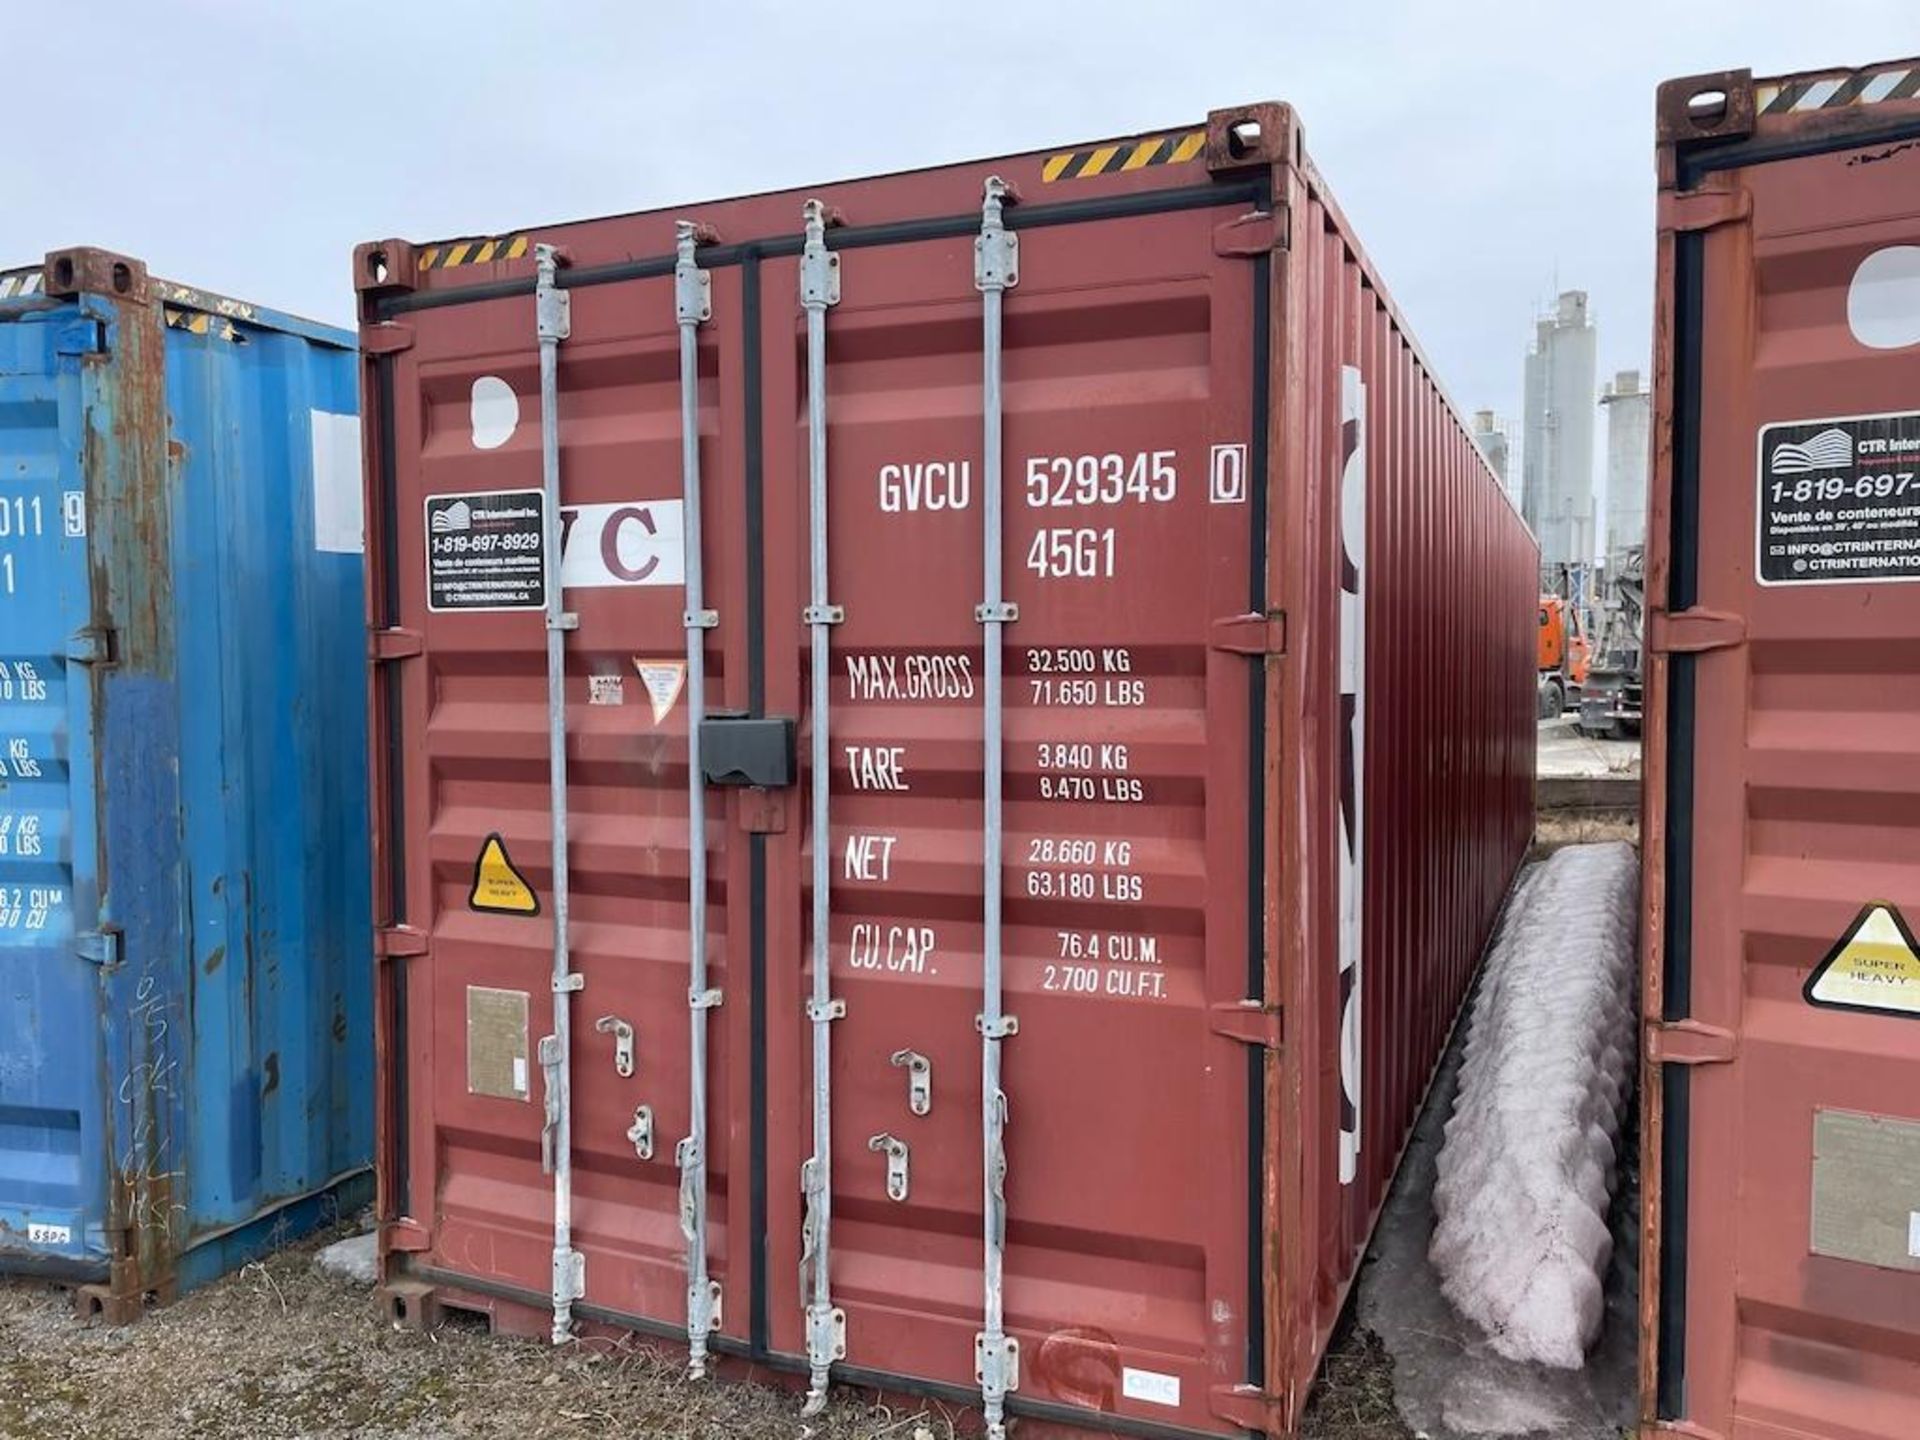 40 FT SEA CONTAINER, EXCLUDING CONTENTS, DELAYED PICK UP UNTIL MAY 13 [14] [TROIS RIVIERES] *PLEASE - Image 2 of 4